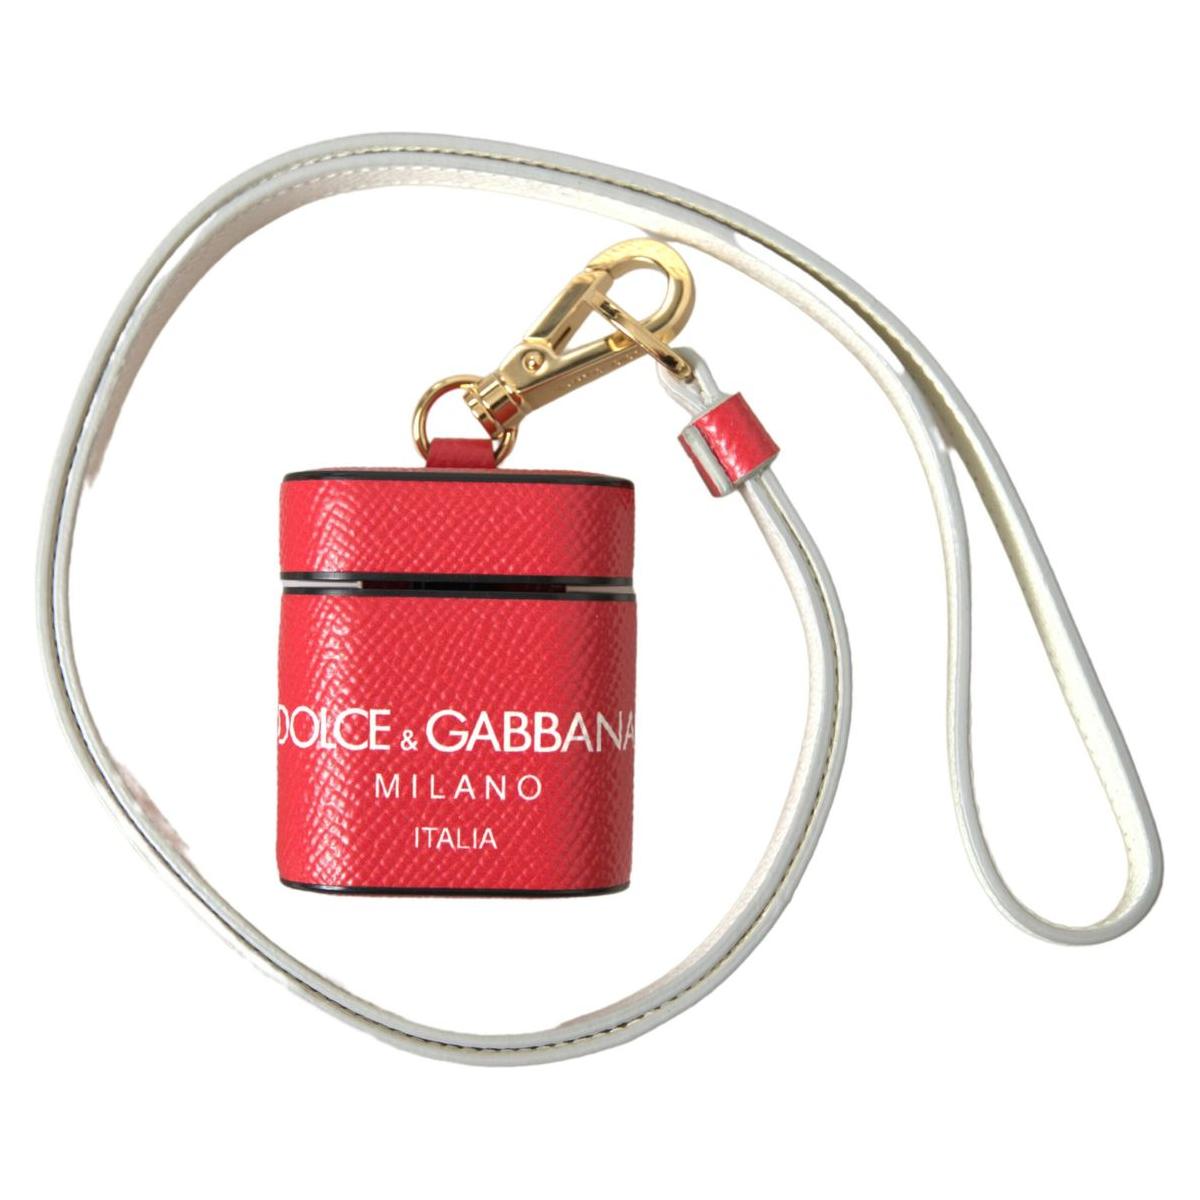 Dolce & Gabbana Elegant Red Calf Leather Airpods Case red-leather-gold-tone-metal-logo-print-strap-airpods-case 465A4822-scaled-bc3fc287-b6b.jpg